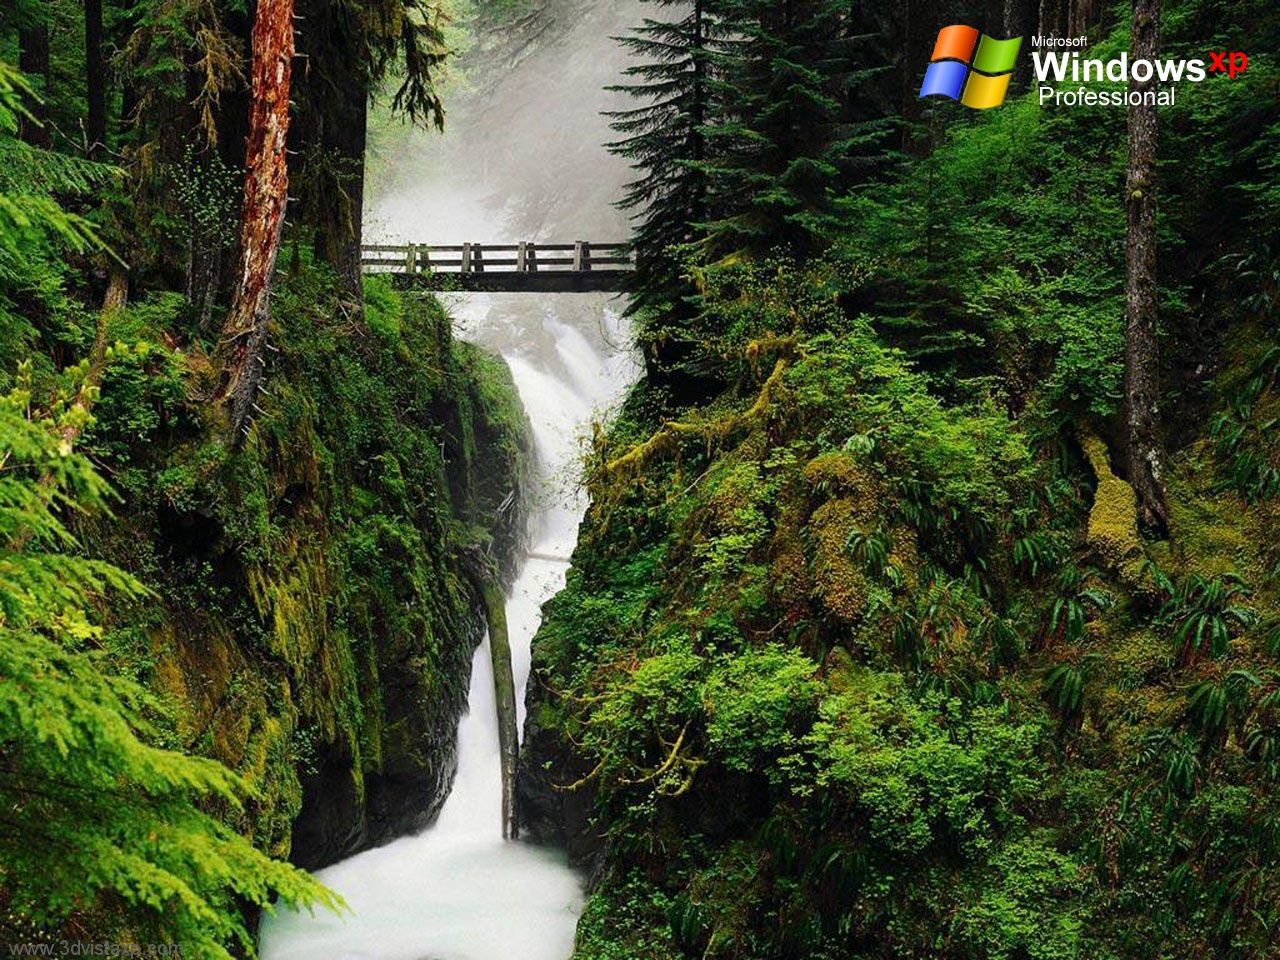 Desktop wallpapers images backgrounds HD highquality windows natural nature